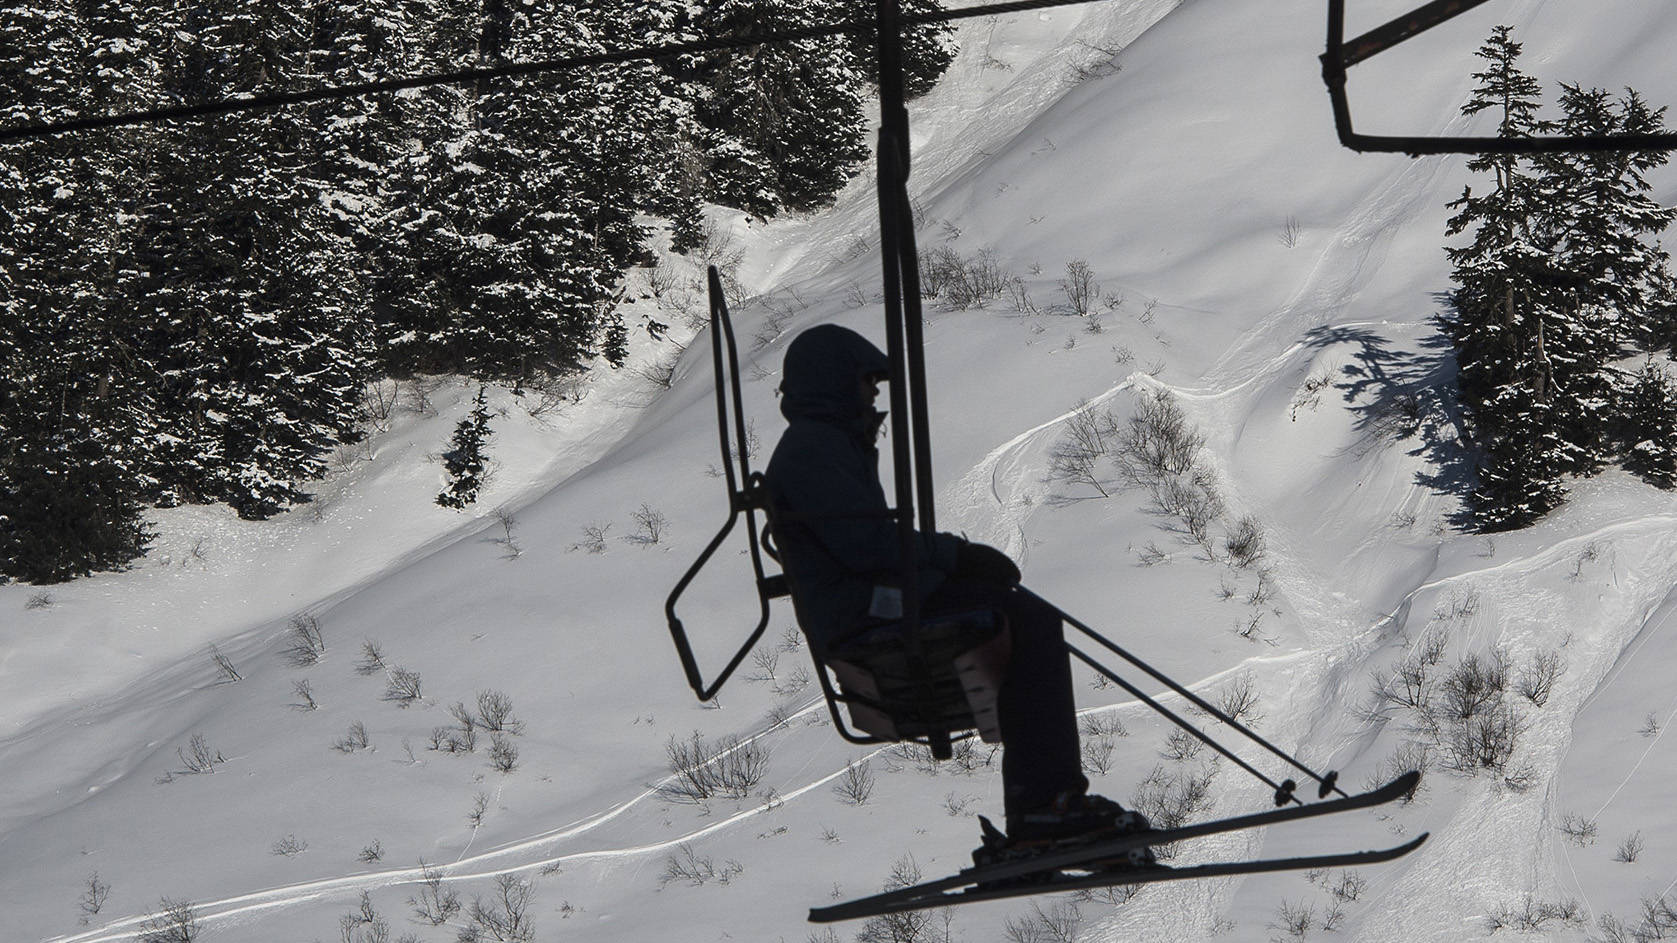 A skier rides the Hooter Chairlift at Eaglecrest. The ski area will be able to serve alcohol moving forward, though it’s unclear whether alcohol sales will start this coming season or next year.